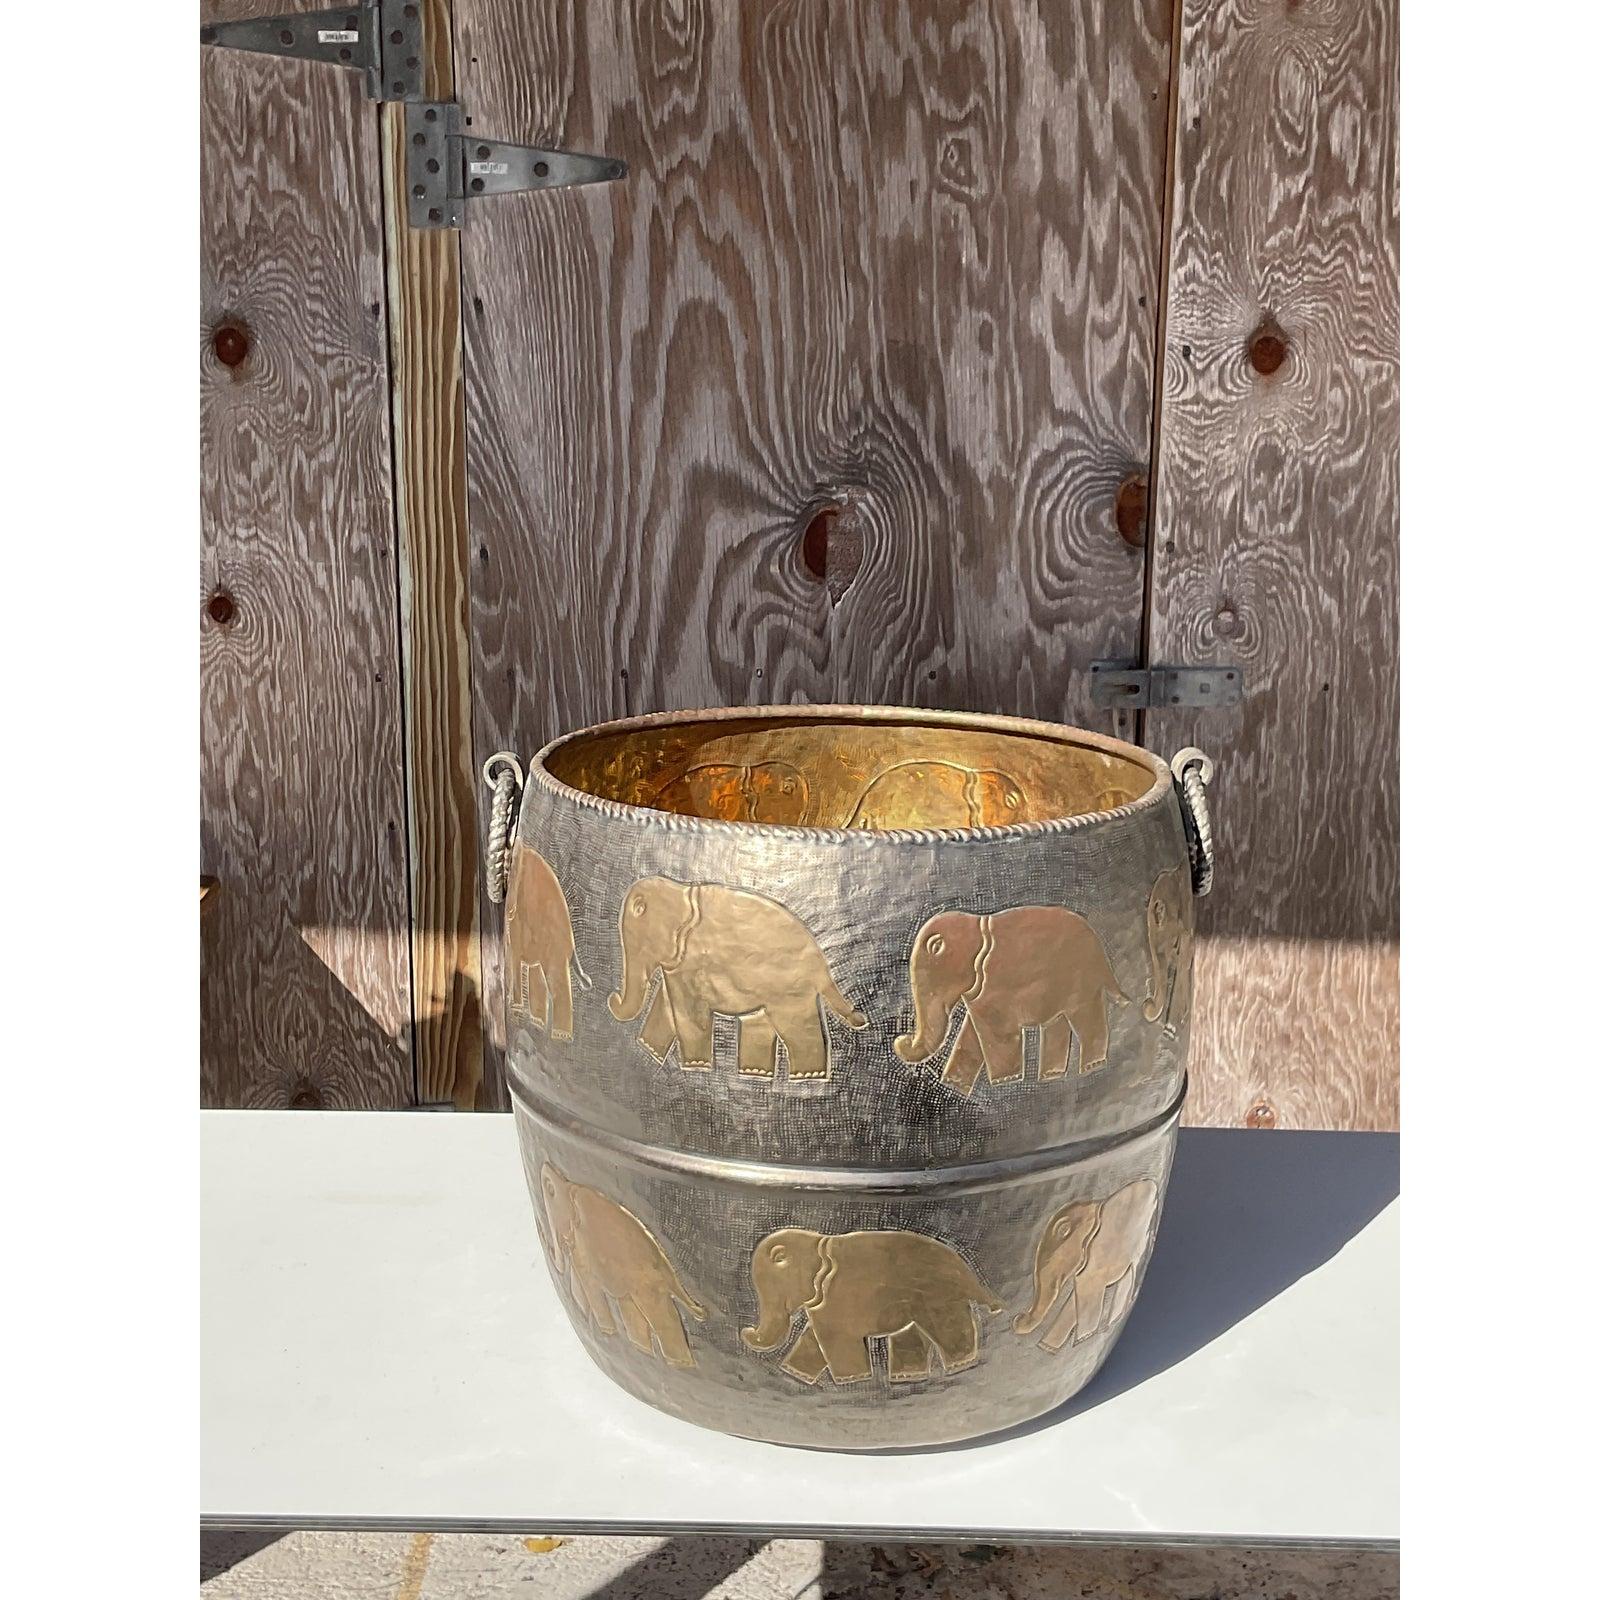 Fantastic vintage metal planter. A chic elephant walk design in hammered brass. Perfect as is or use for your plants. You decide! Acquired from a Palm Beach estate.